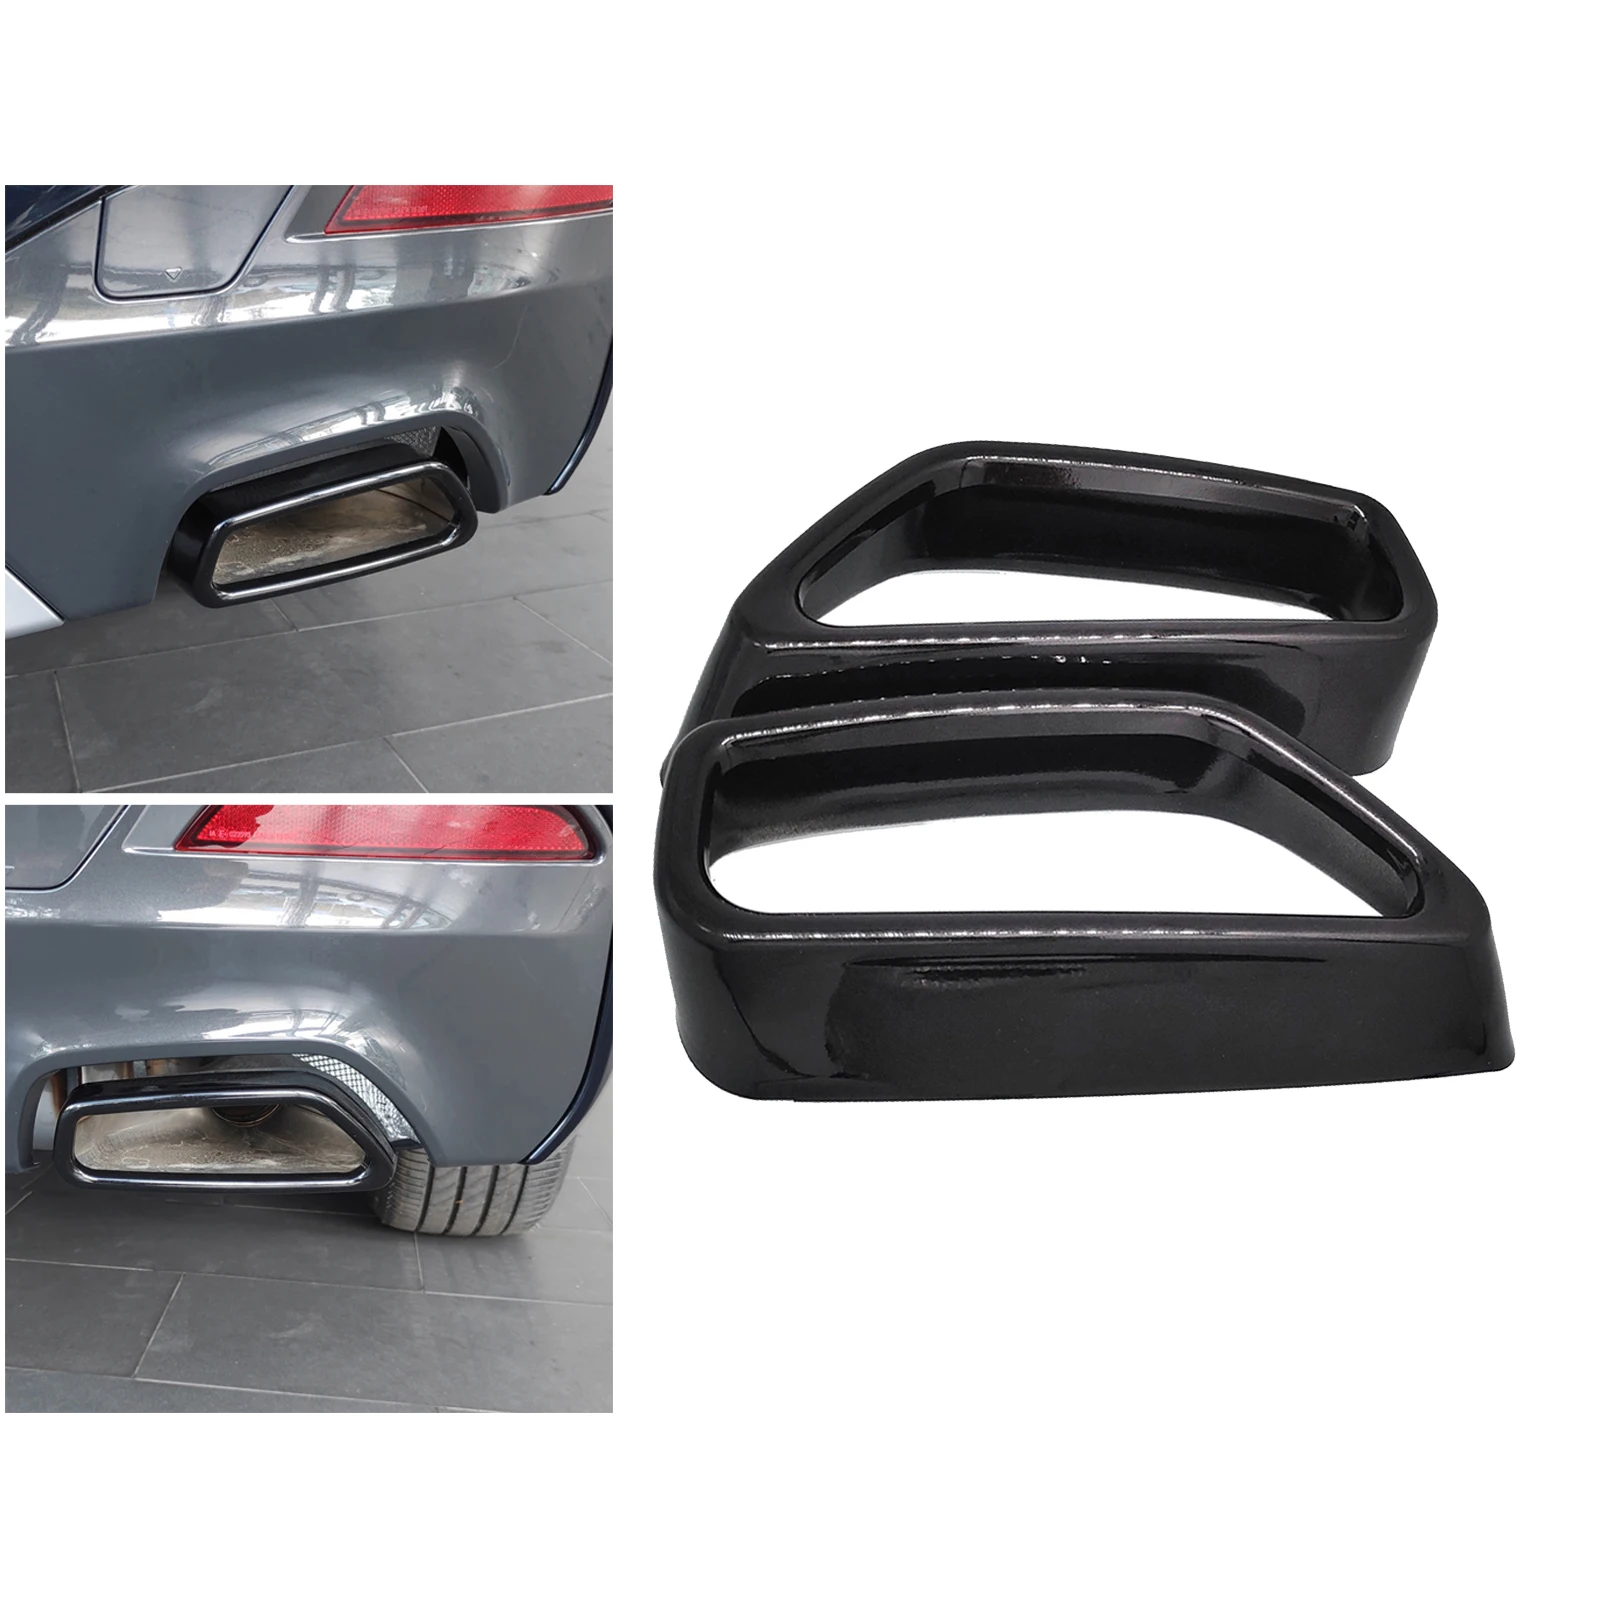 Rear Exhaust Muffler Pipe Cover Trim Tail Throat Frame Decoration fits for BMW 5 G30 G38